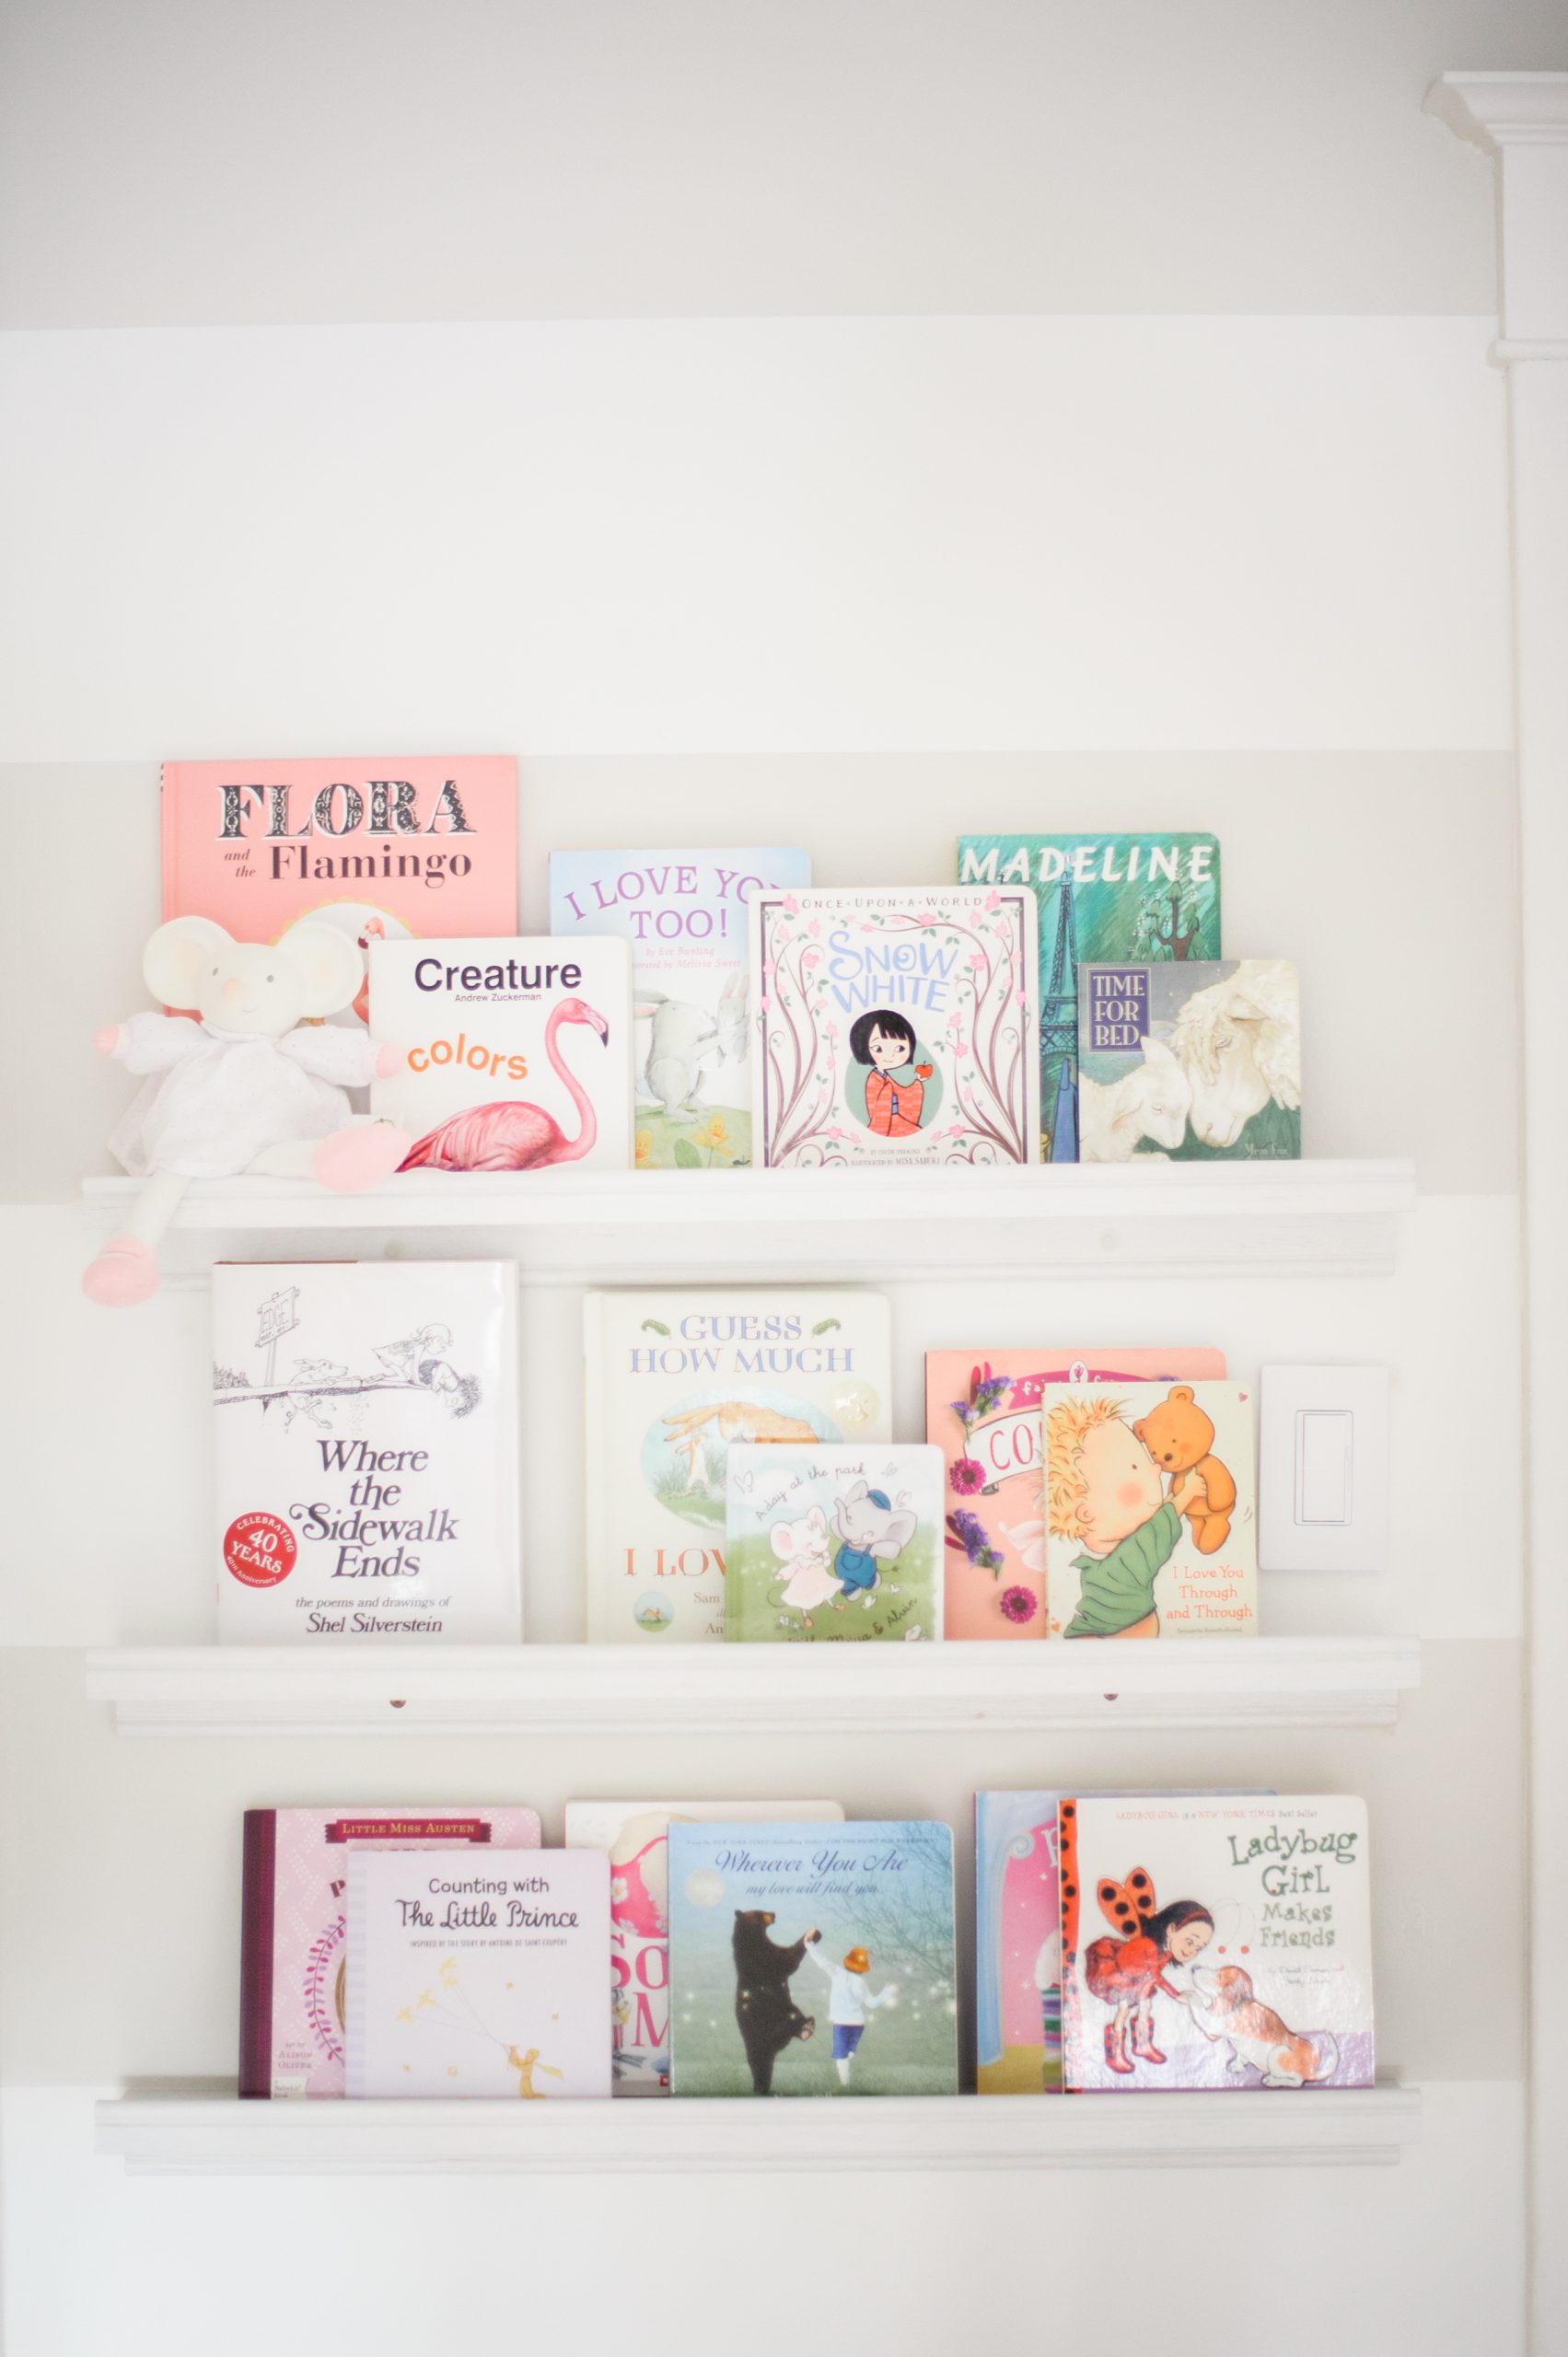 Picture ledges create a library wall to display children's books.